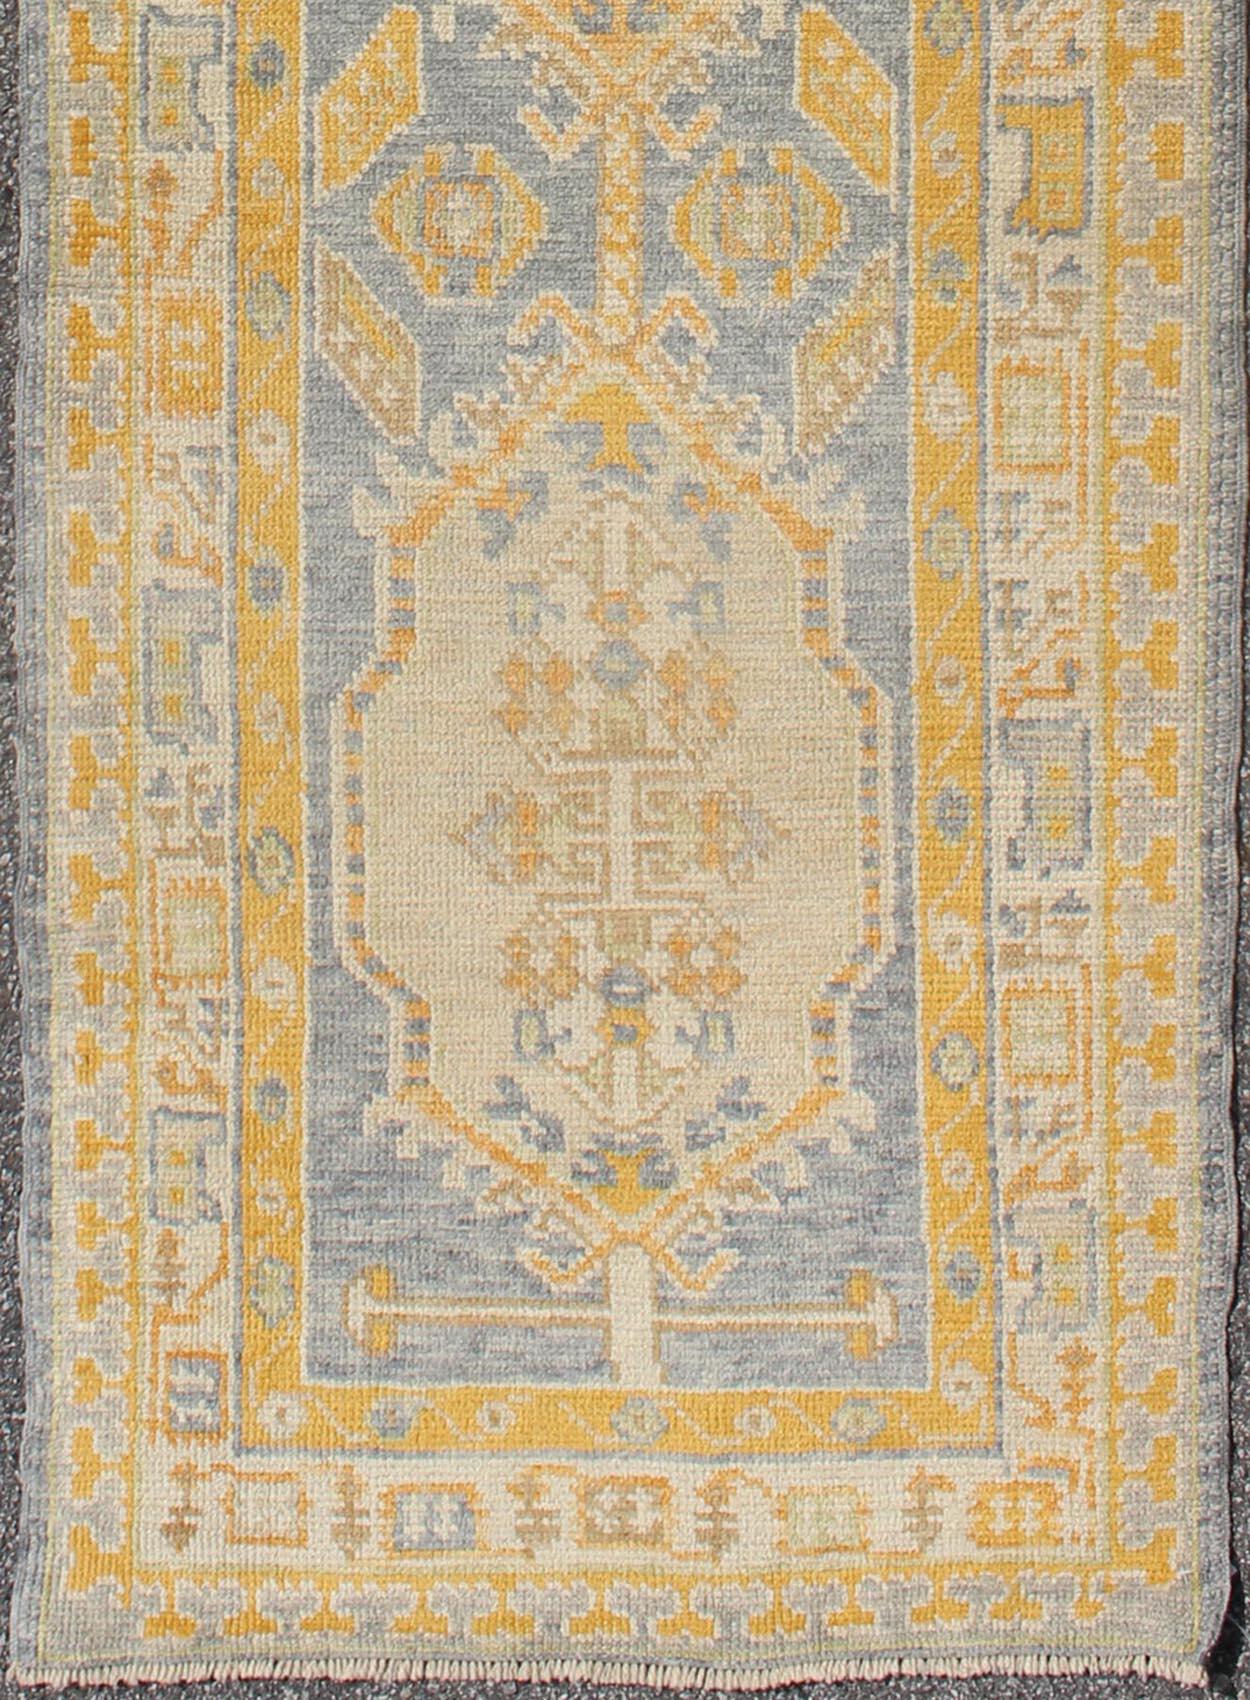 Turkish Oushak runner with traditional medallions and elegant traditional medallion design.  Keivan Woven Arts, rug en-165661, country of origin / type: Turkey / Oushak
Measures: 2'7 x 8'10.
This traditional Oushak runner from Turkey features a